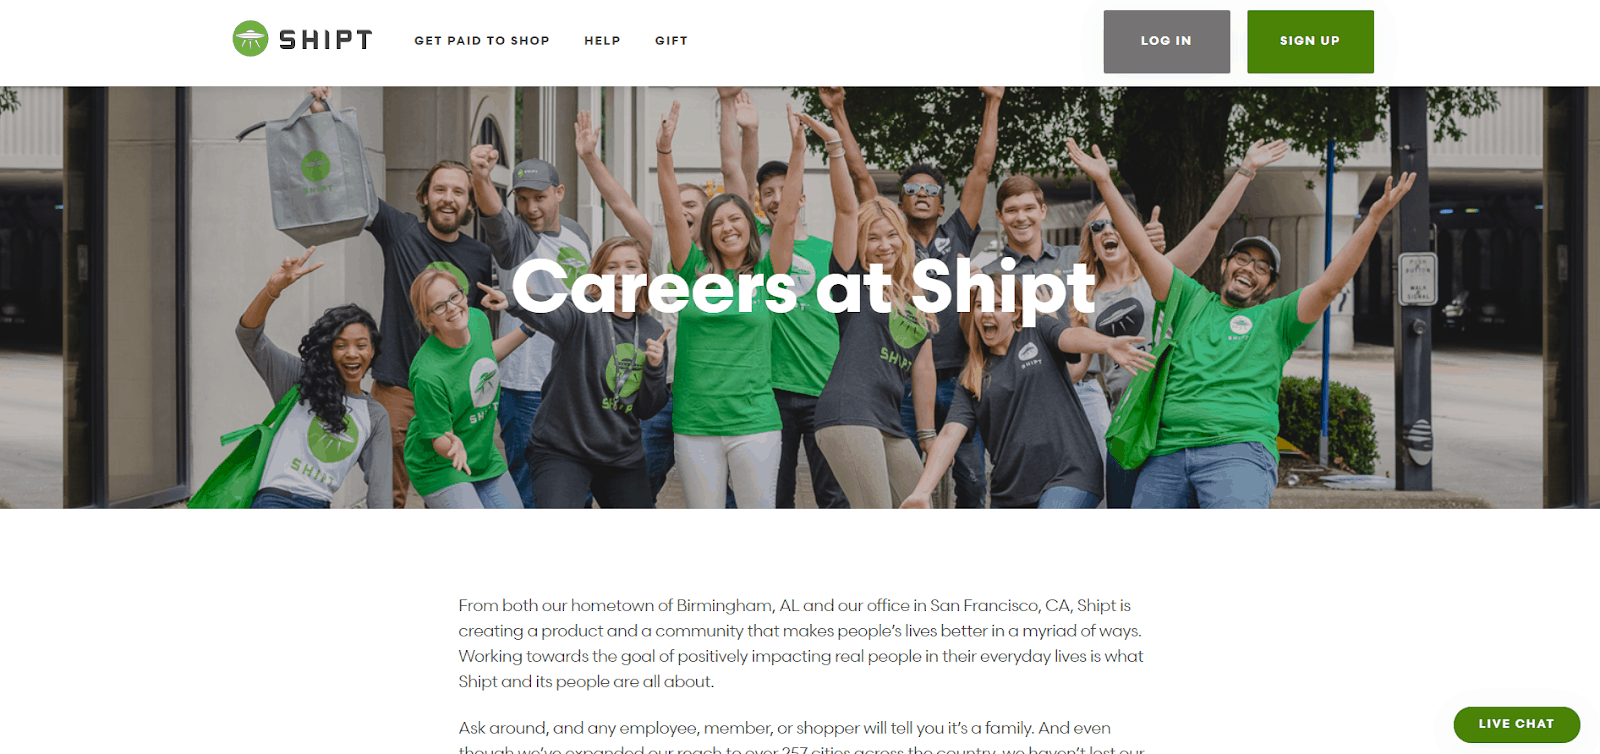 Shipt driver careers page